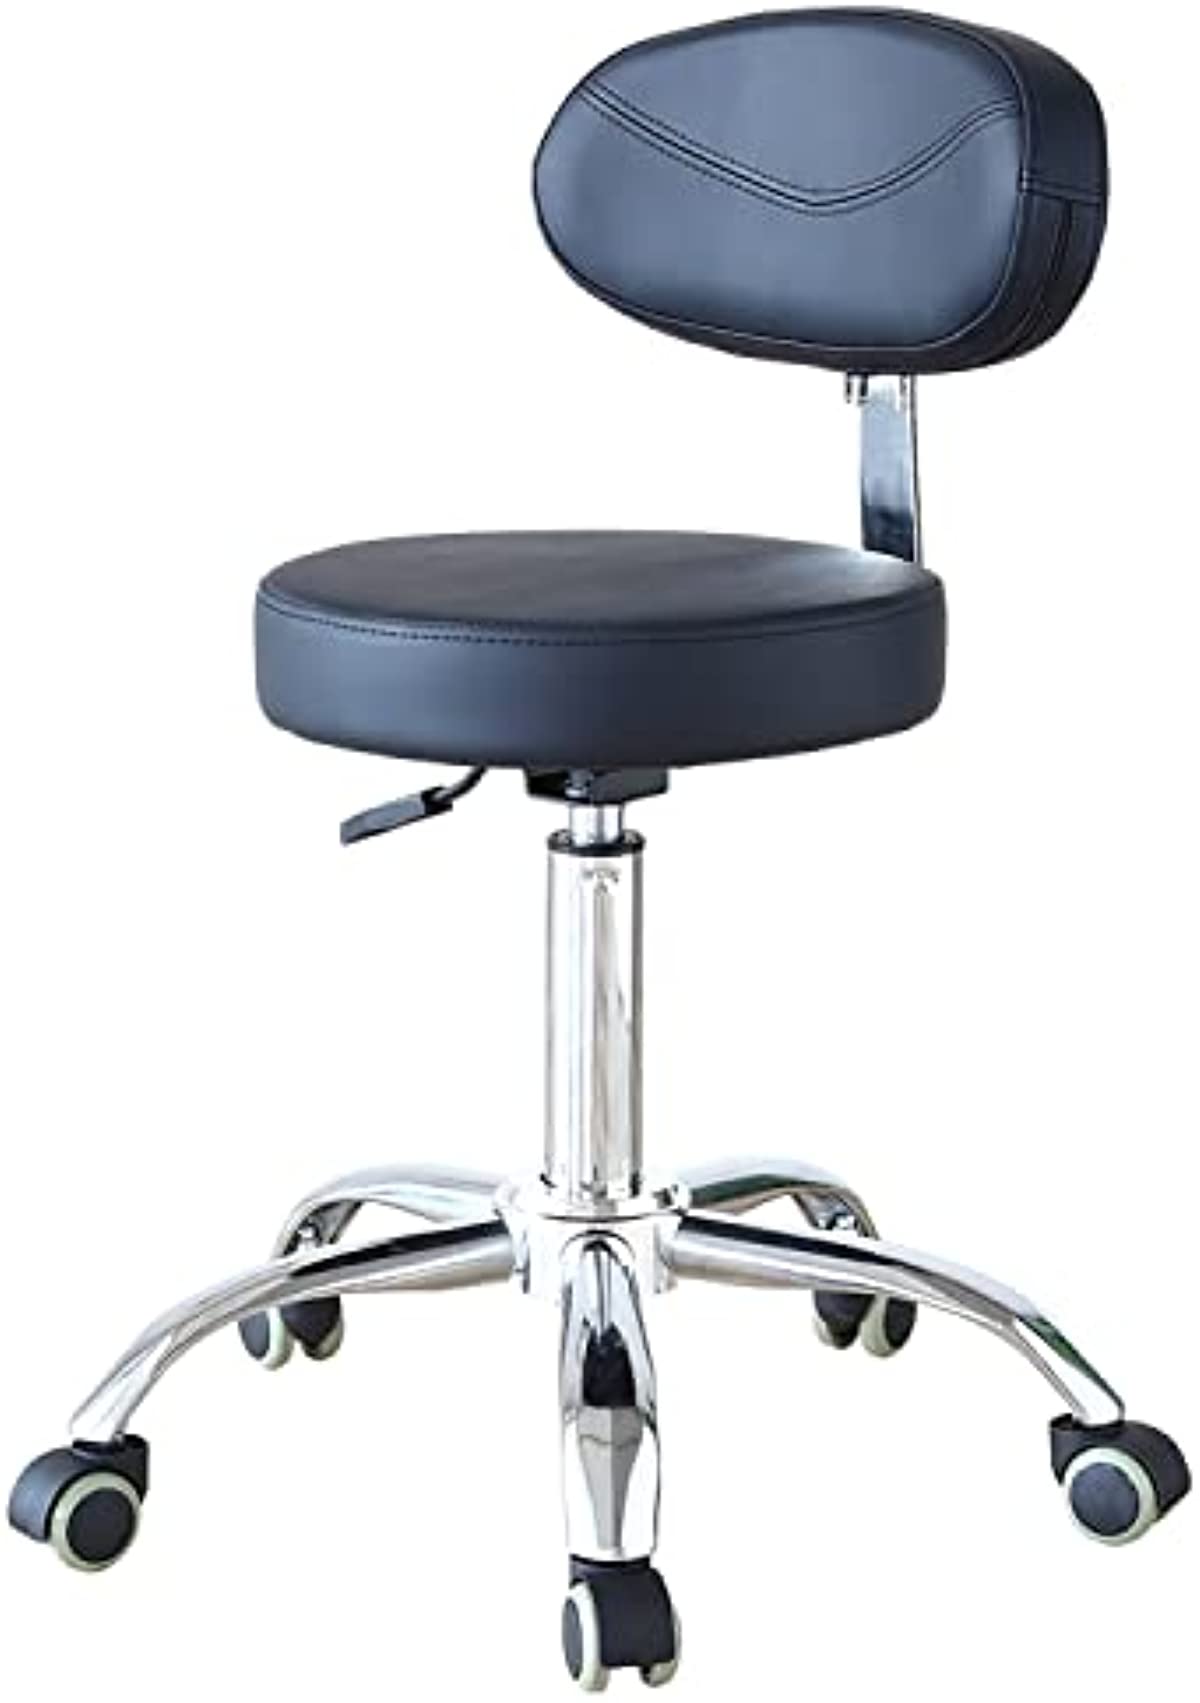 FOHGFNT Drafting Adjustable Rolling Swivel Stool Chair for Massage Facial Beauty Salon Spa Medical Dental Clinic Home Office with Backrest and Wheels,Black